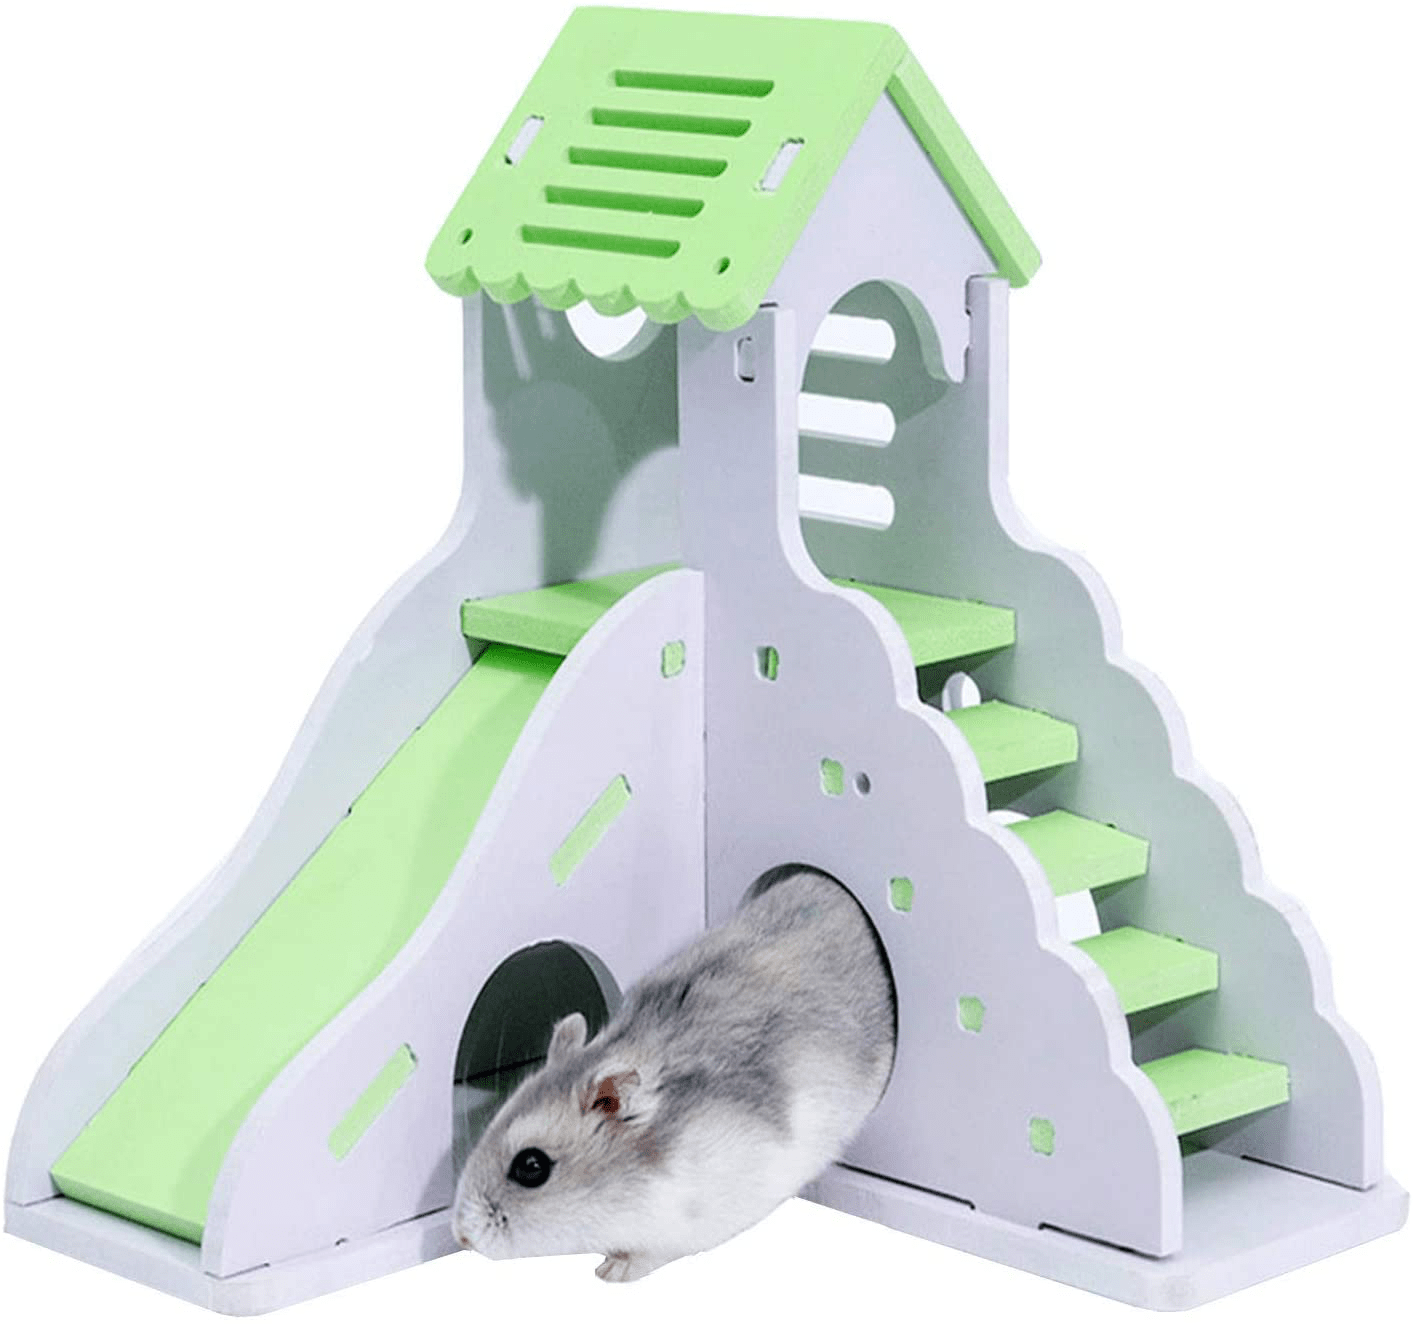 Wooden Hamster House - Pet Small Animal Hideout, Assemble Hamster Hut Villa, Cage Habitat Decor Accessories, Play Toys for Dwarf, Hedgehog, Syrian Hamster, Gerbils Mice Animals & Pet Supplies > Pet Supplies > Small Animal Supplies > Small Animal Habitat Accessories Hesderty   